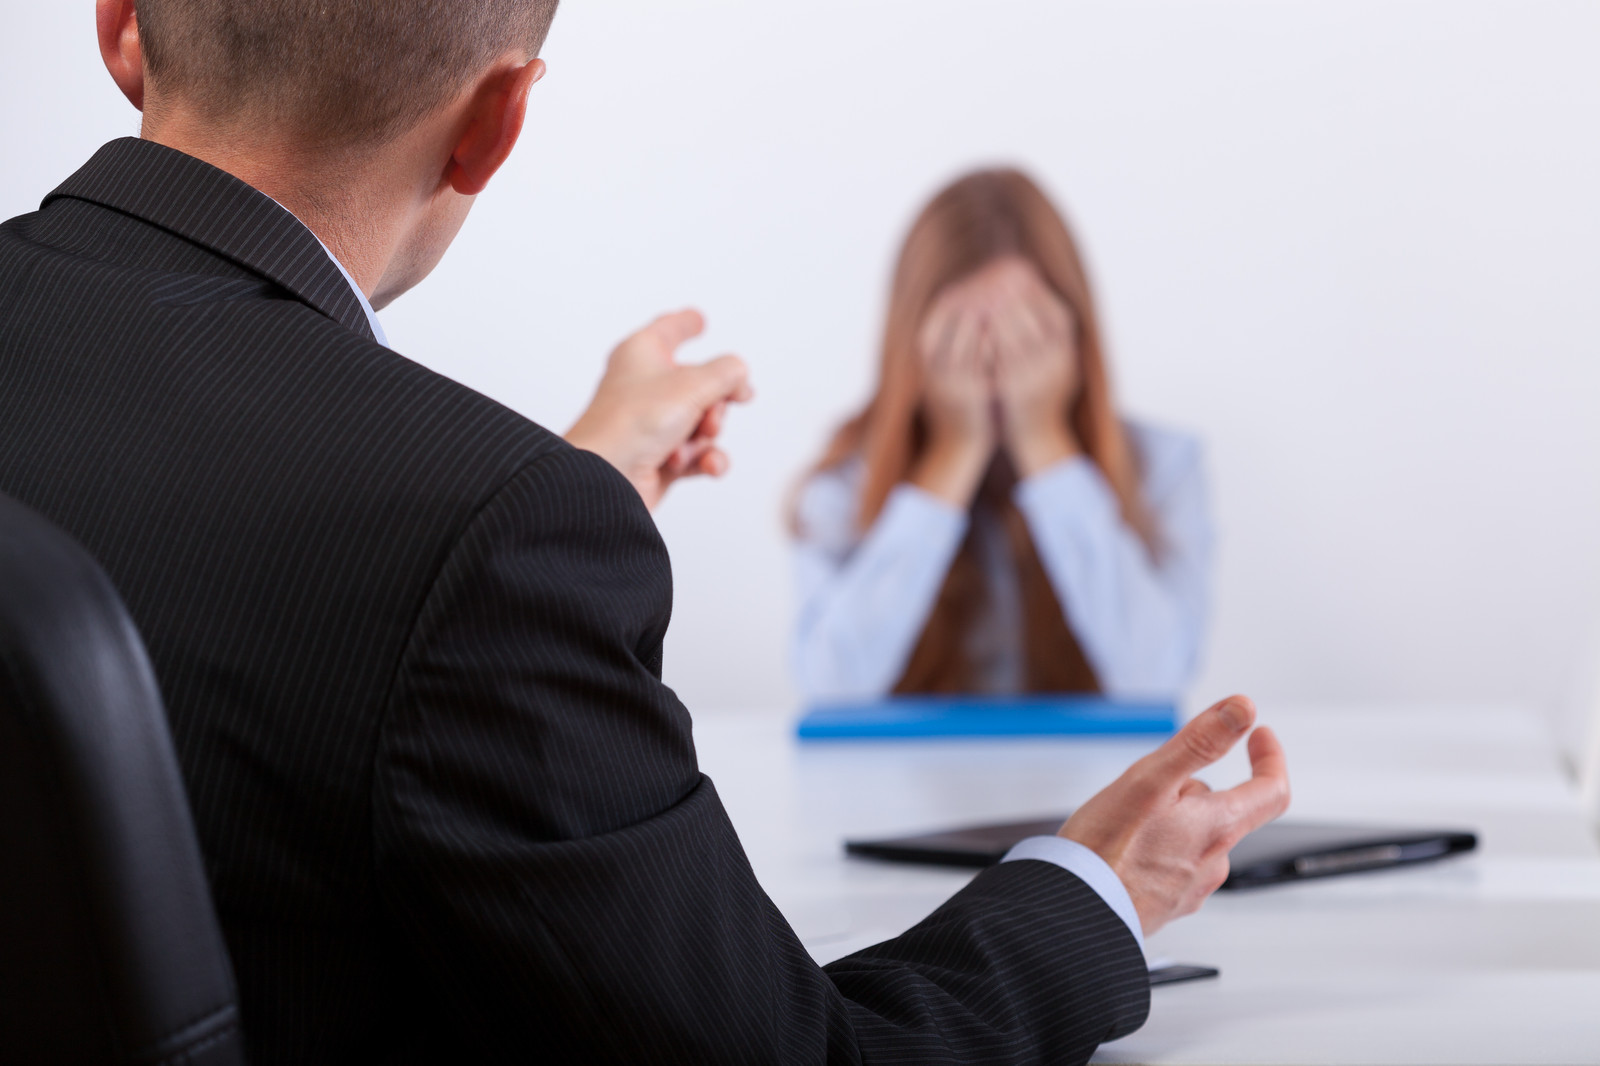 3. Workplace Bullying